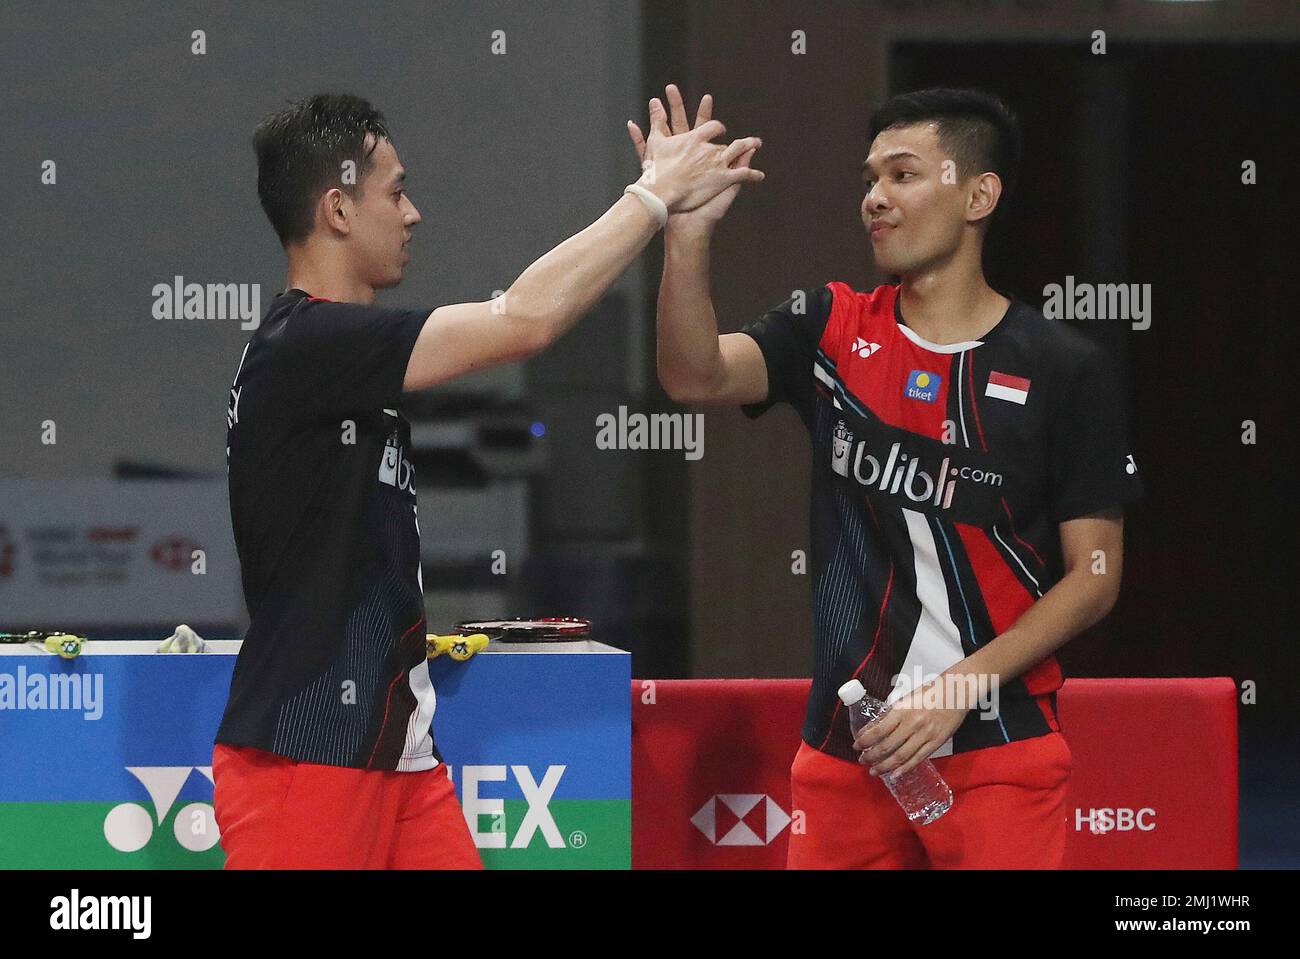 Indonesias Muhammad Rian Ardianto and Fajar Alfian, left, celebrate after winning against Japans Takeshi Kamura and Keigo Sonoda during the mens doubles final match at the Korea Open Badminton in Seoul, South